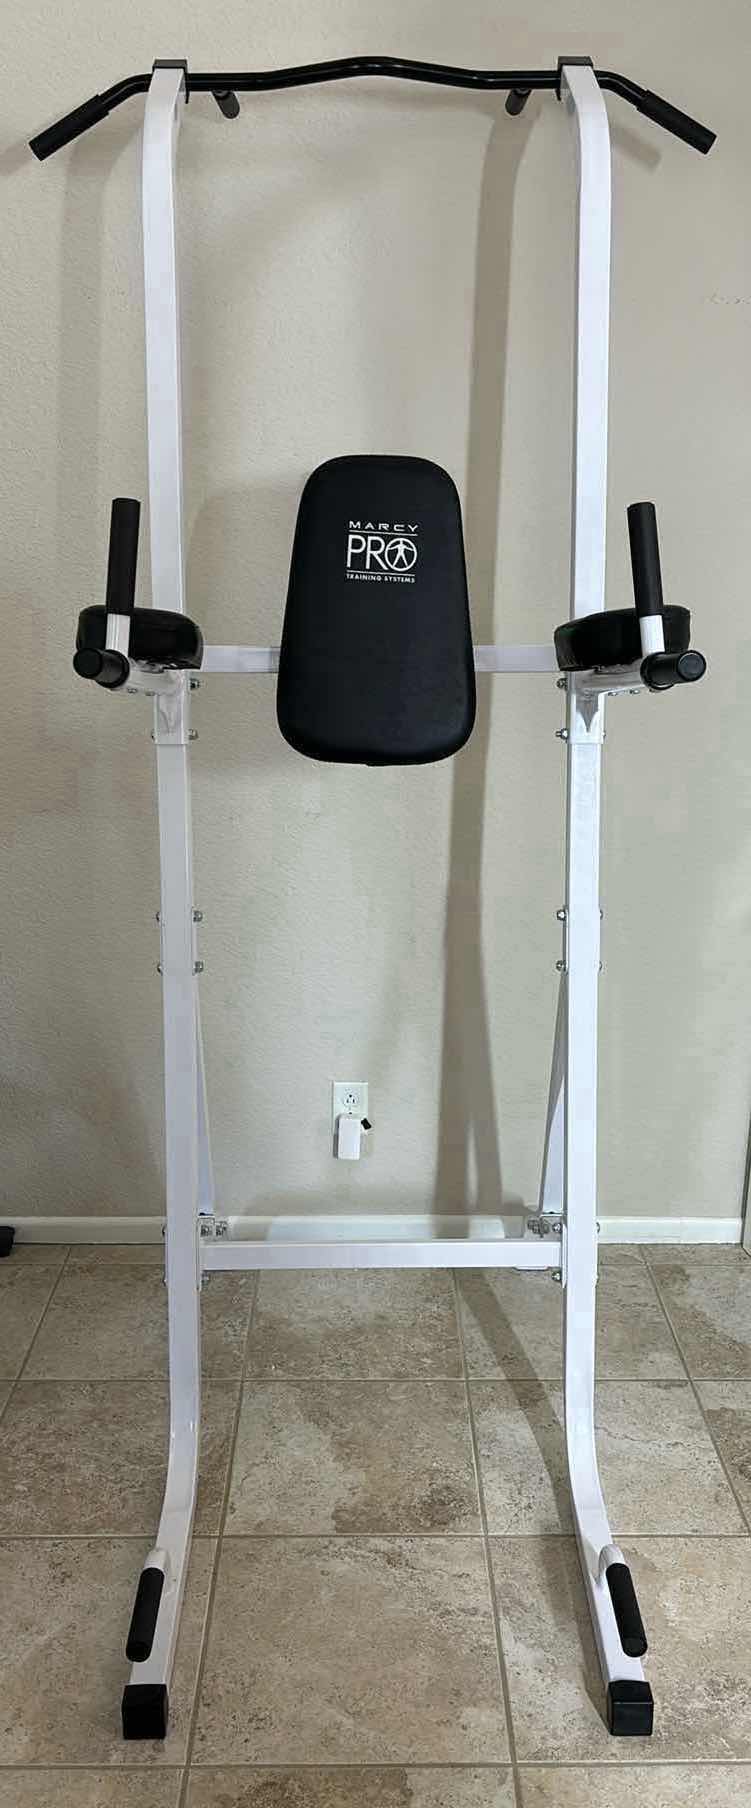 Photo 1 of MARCY PRO TRAINING SYSTEM “POWER TOWER” W DIP HANDLES, PULL UP BAR, 49"L x 41.30"W x 85.80"H TC-4699 (READ NOTES)